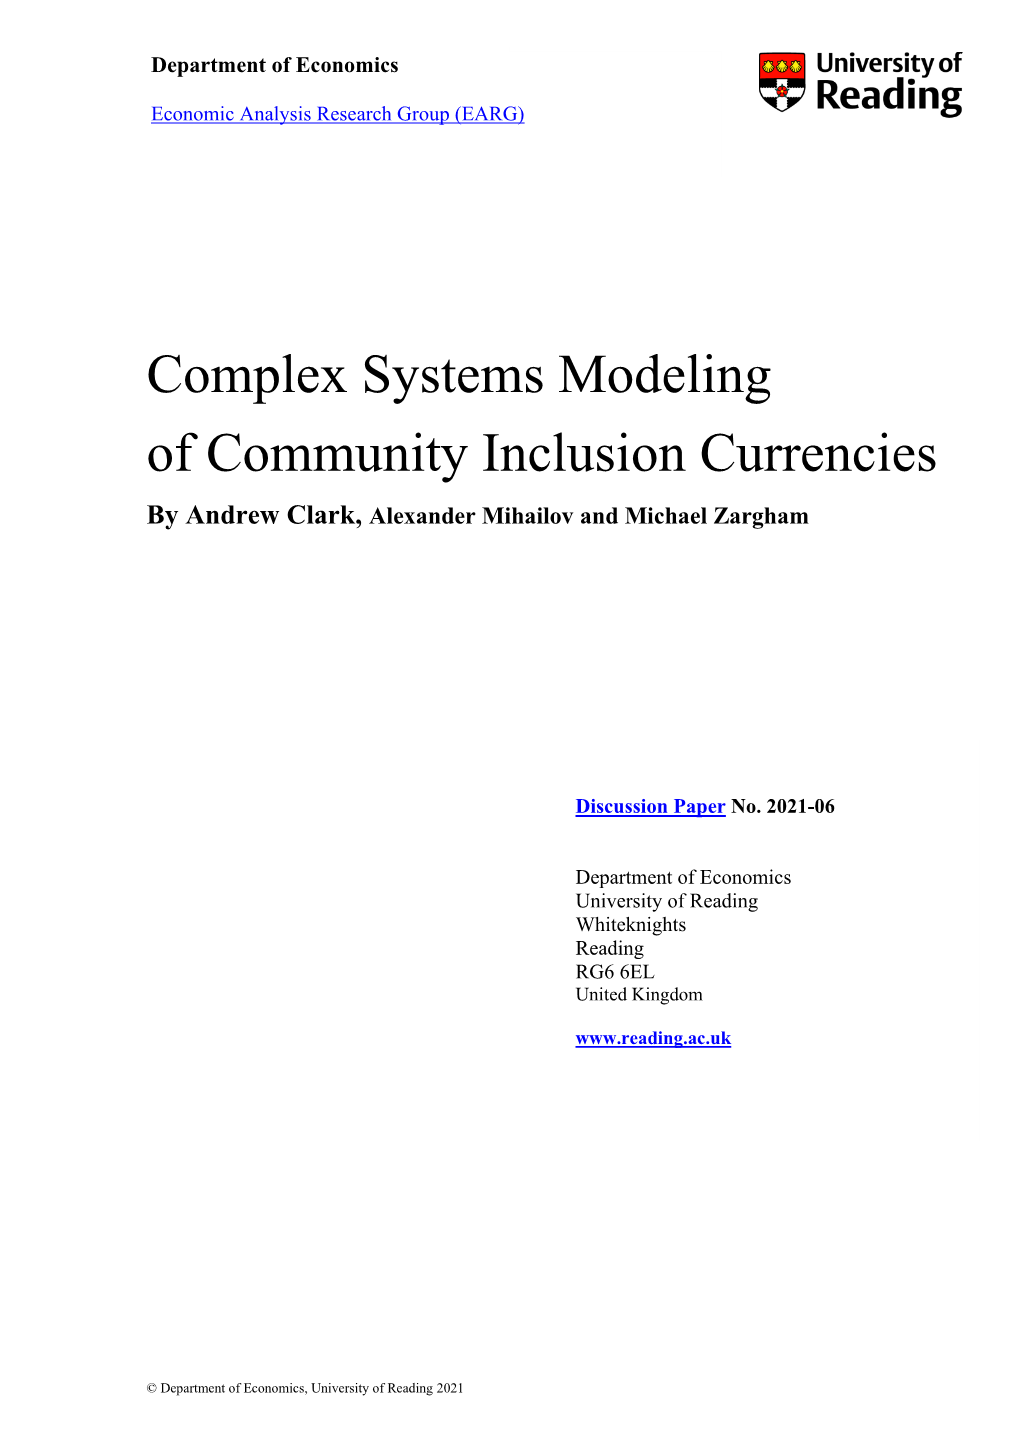 Complex Systems Modeling of Community Inclusion Currencies by Andrew Clark, Alexander Mihailov and Michael Zargham